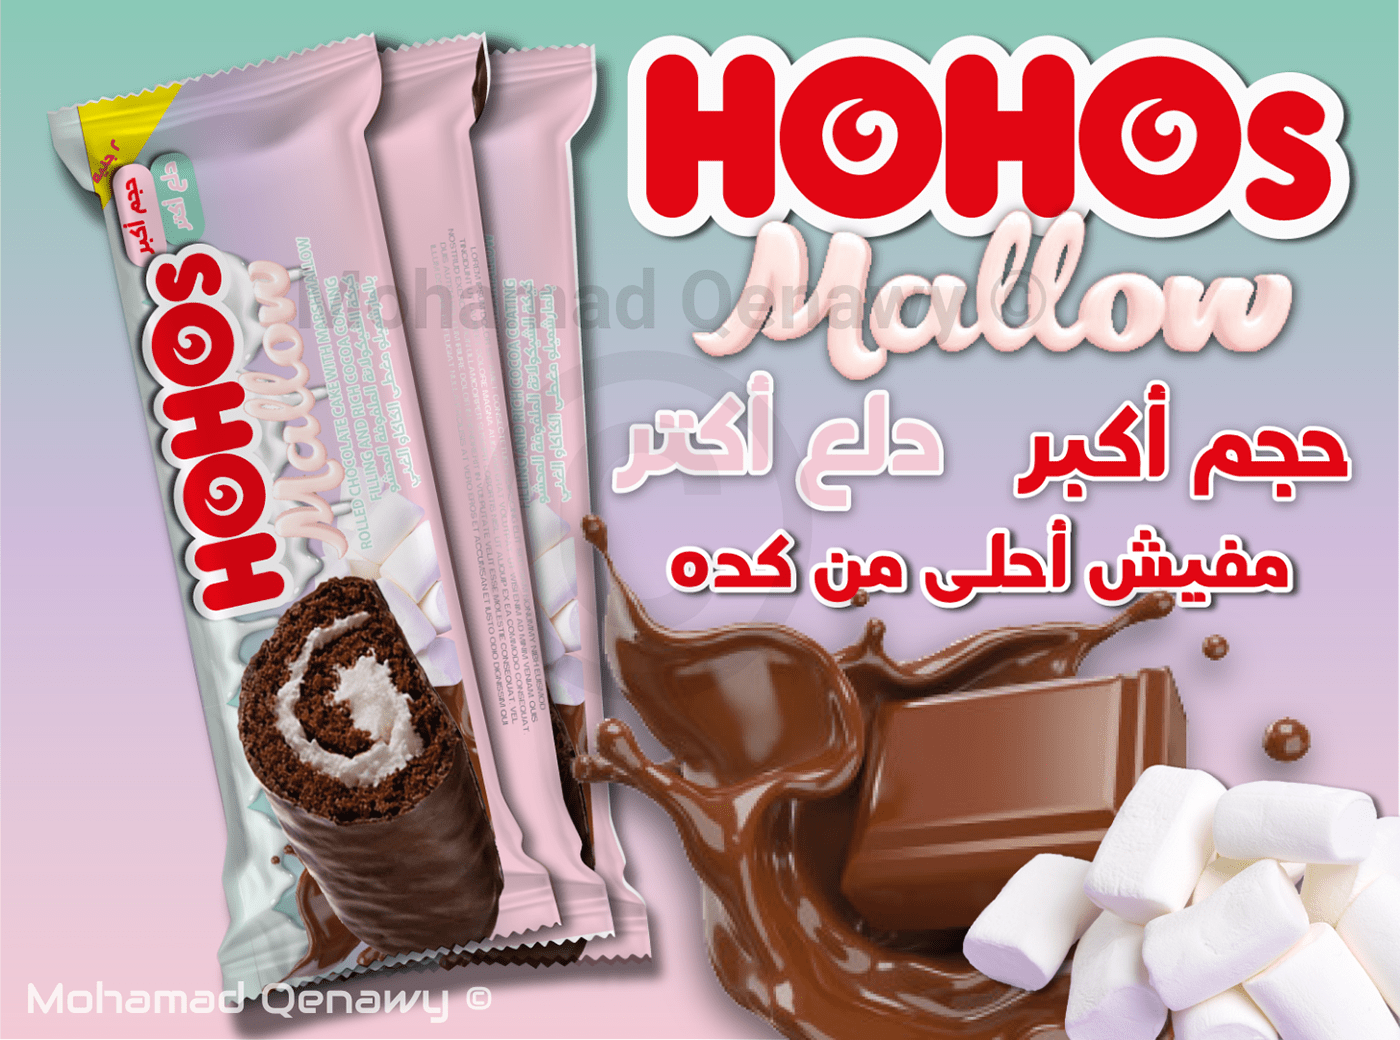 bestätigt big cake chocolate Cocoa cream design dripping Edita feminine Filled Food  HOHOS inspiration mallow marshmallow melted Packaging pink Roll rosy size softy swiss taste yummy